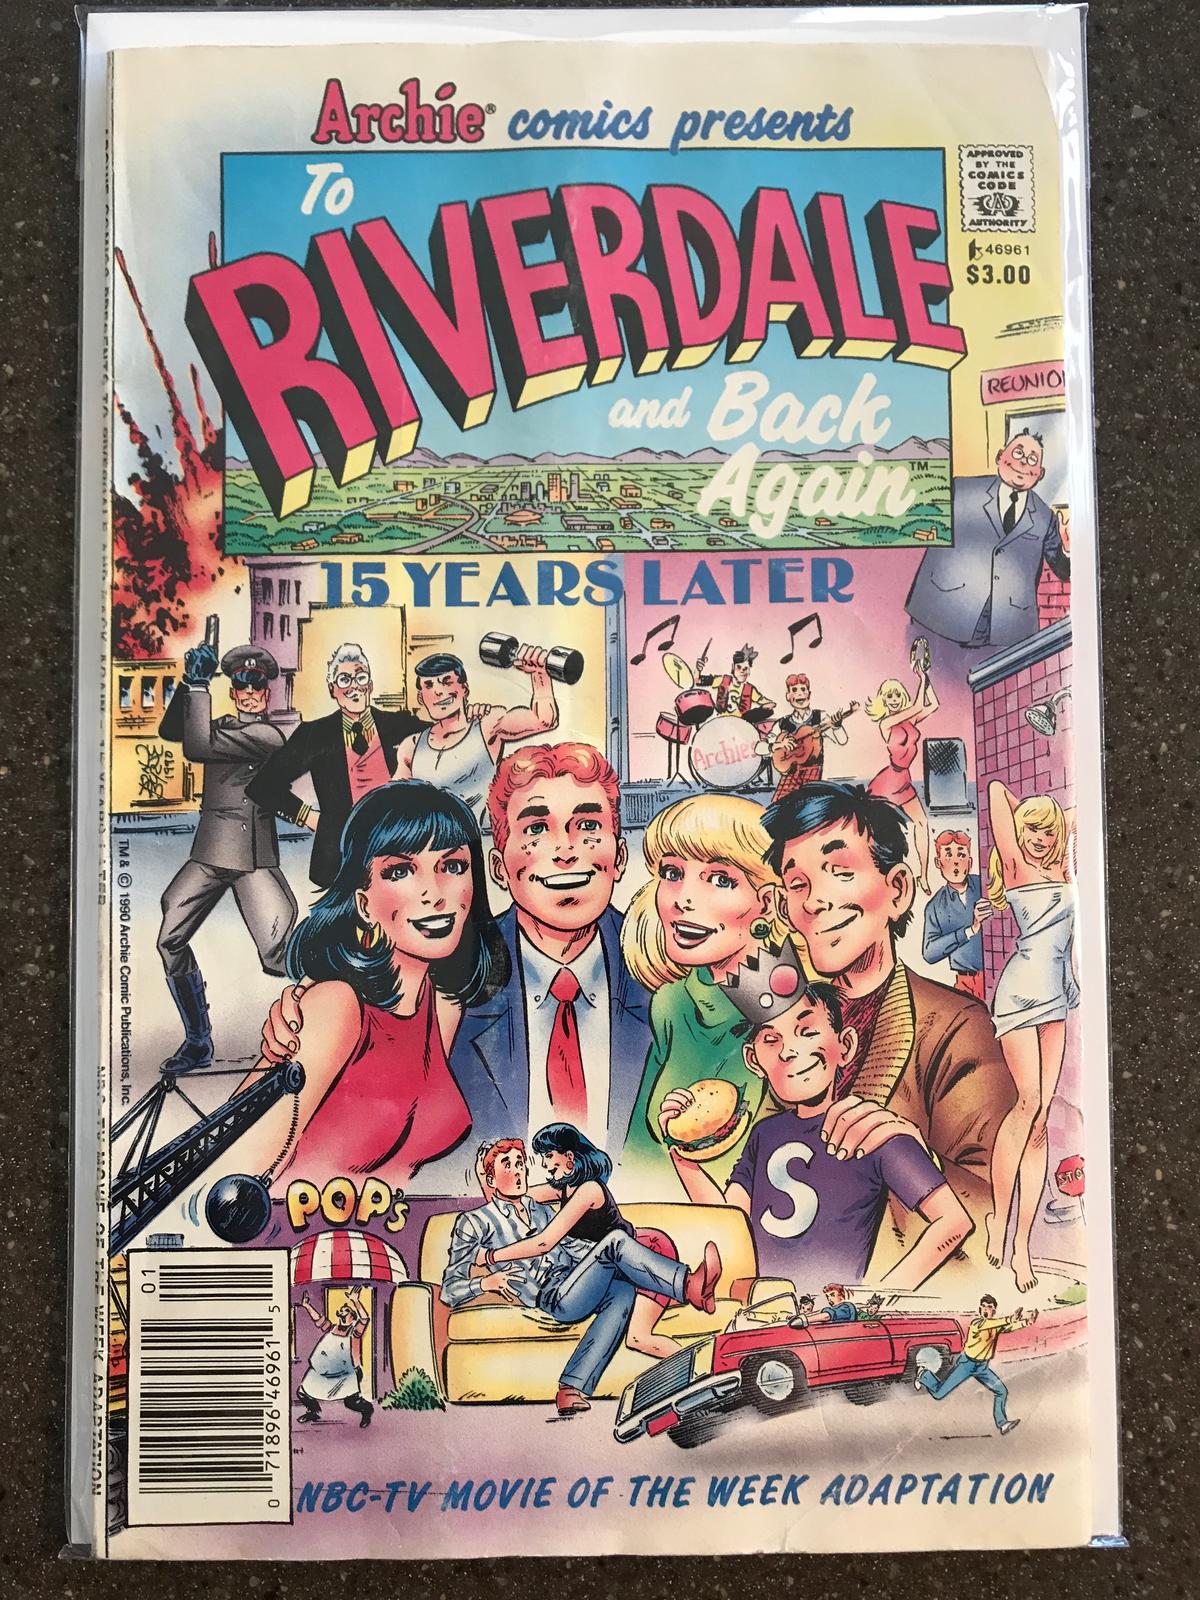 To Riverdale and Back Again - 15 years later Archie Comics Presents TV Adaptation